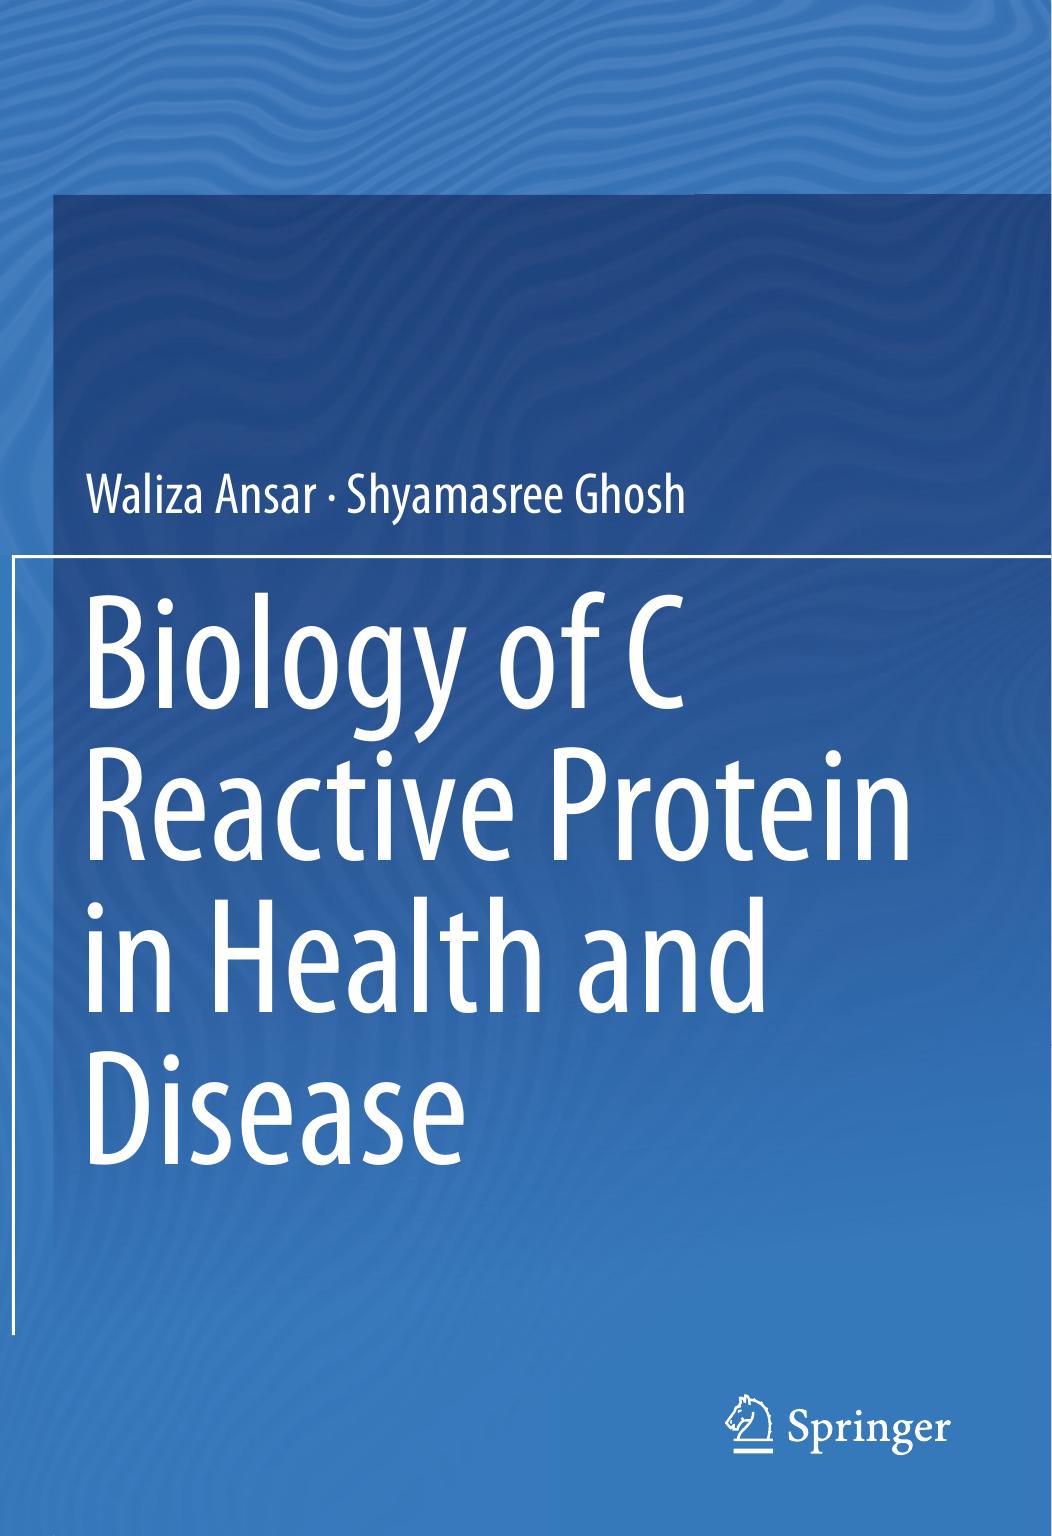 BIOLOGY OF C Reactive Protein in Health 2016